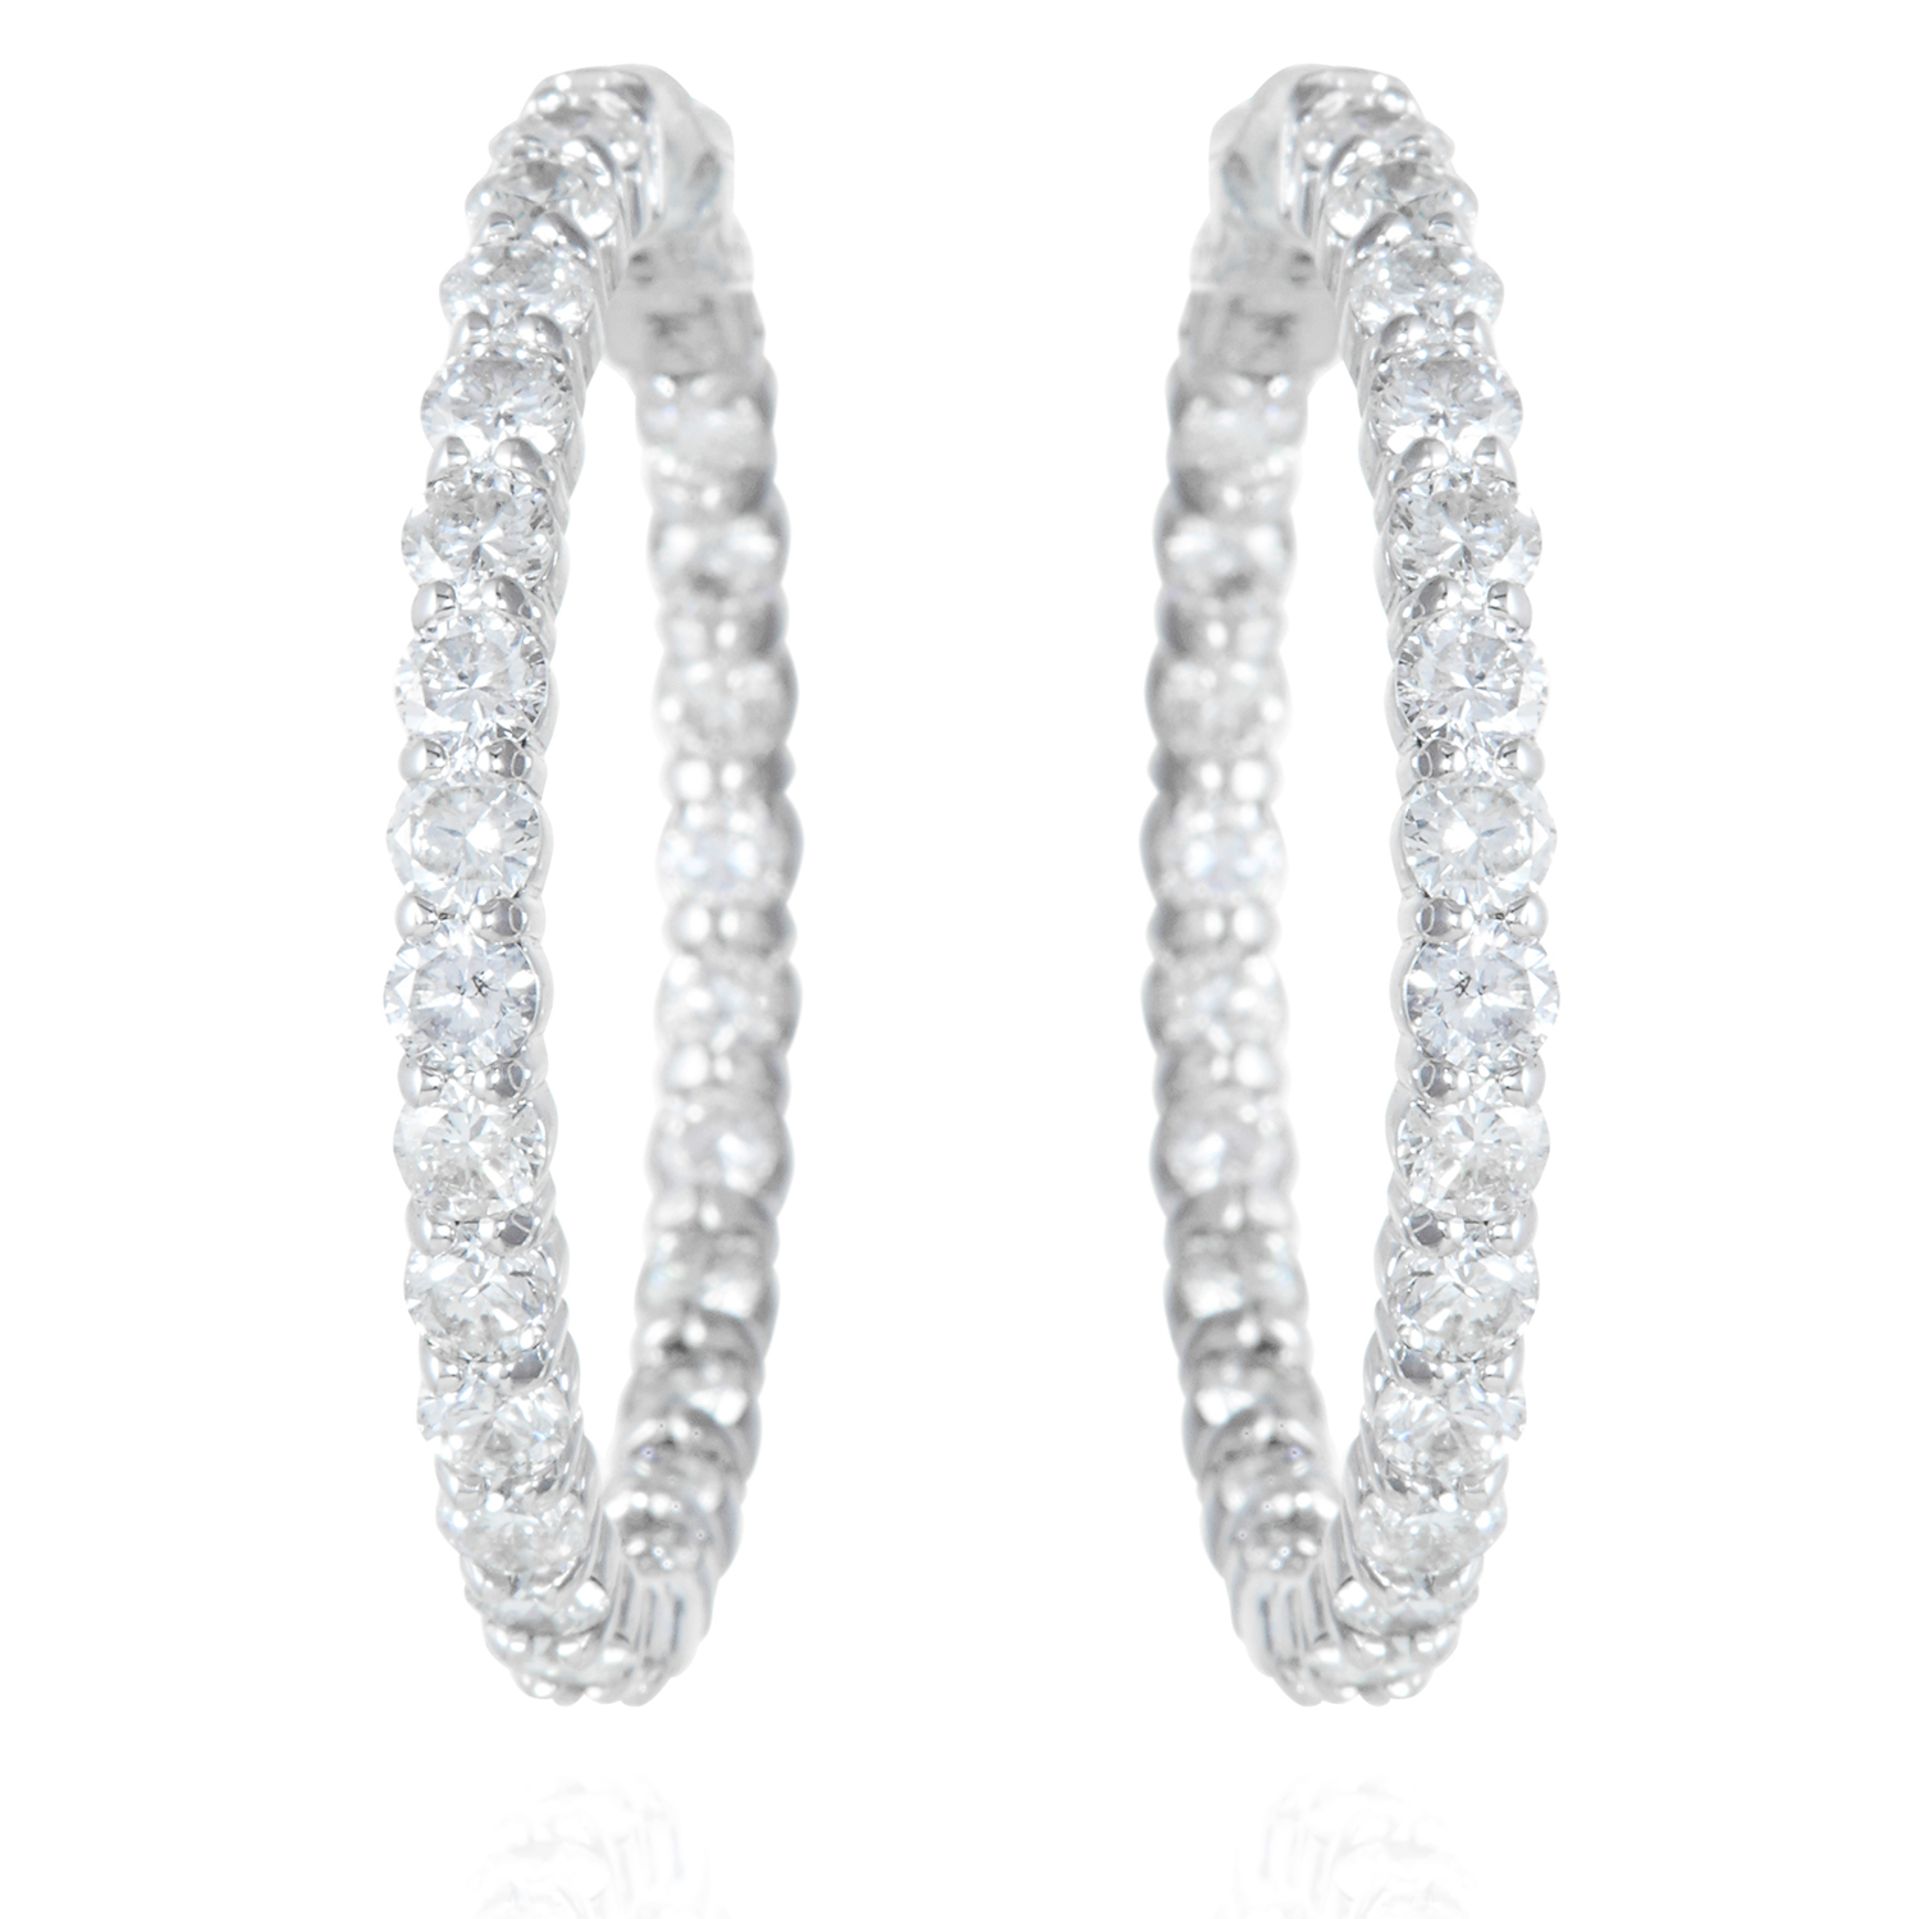 A PAIR OF 5.0 CARAT DIAMOND HOOP EARRINGS in white gold, the full hoops jewelled with round cut